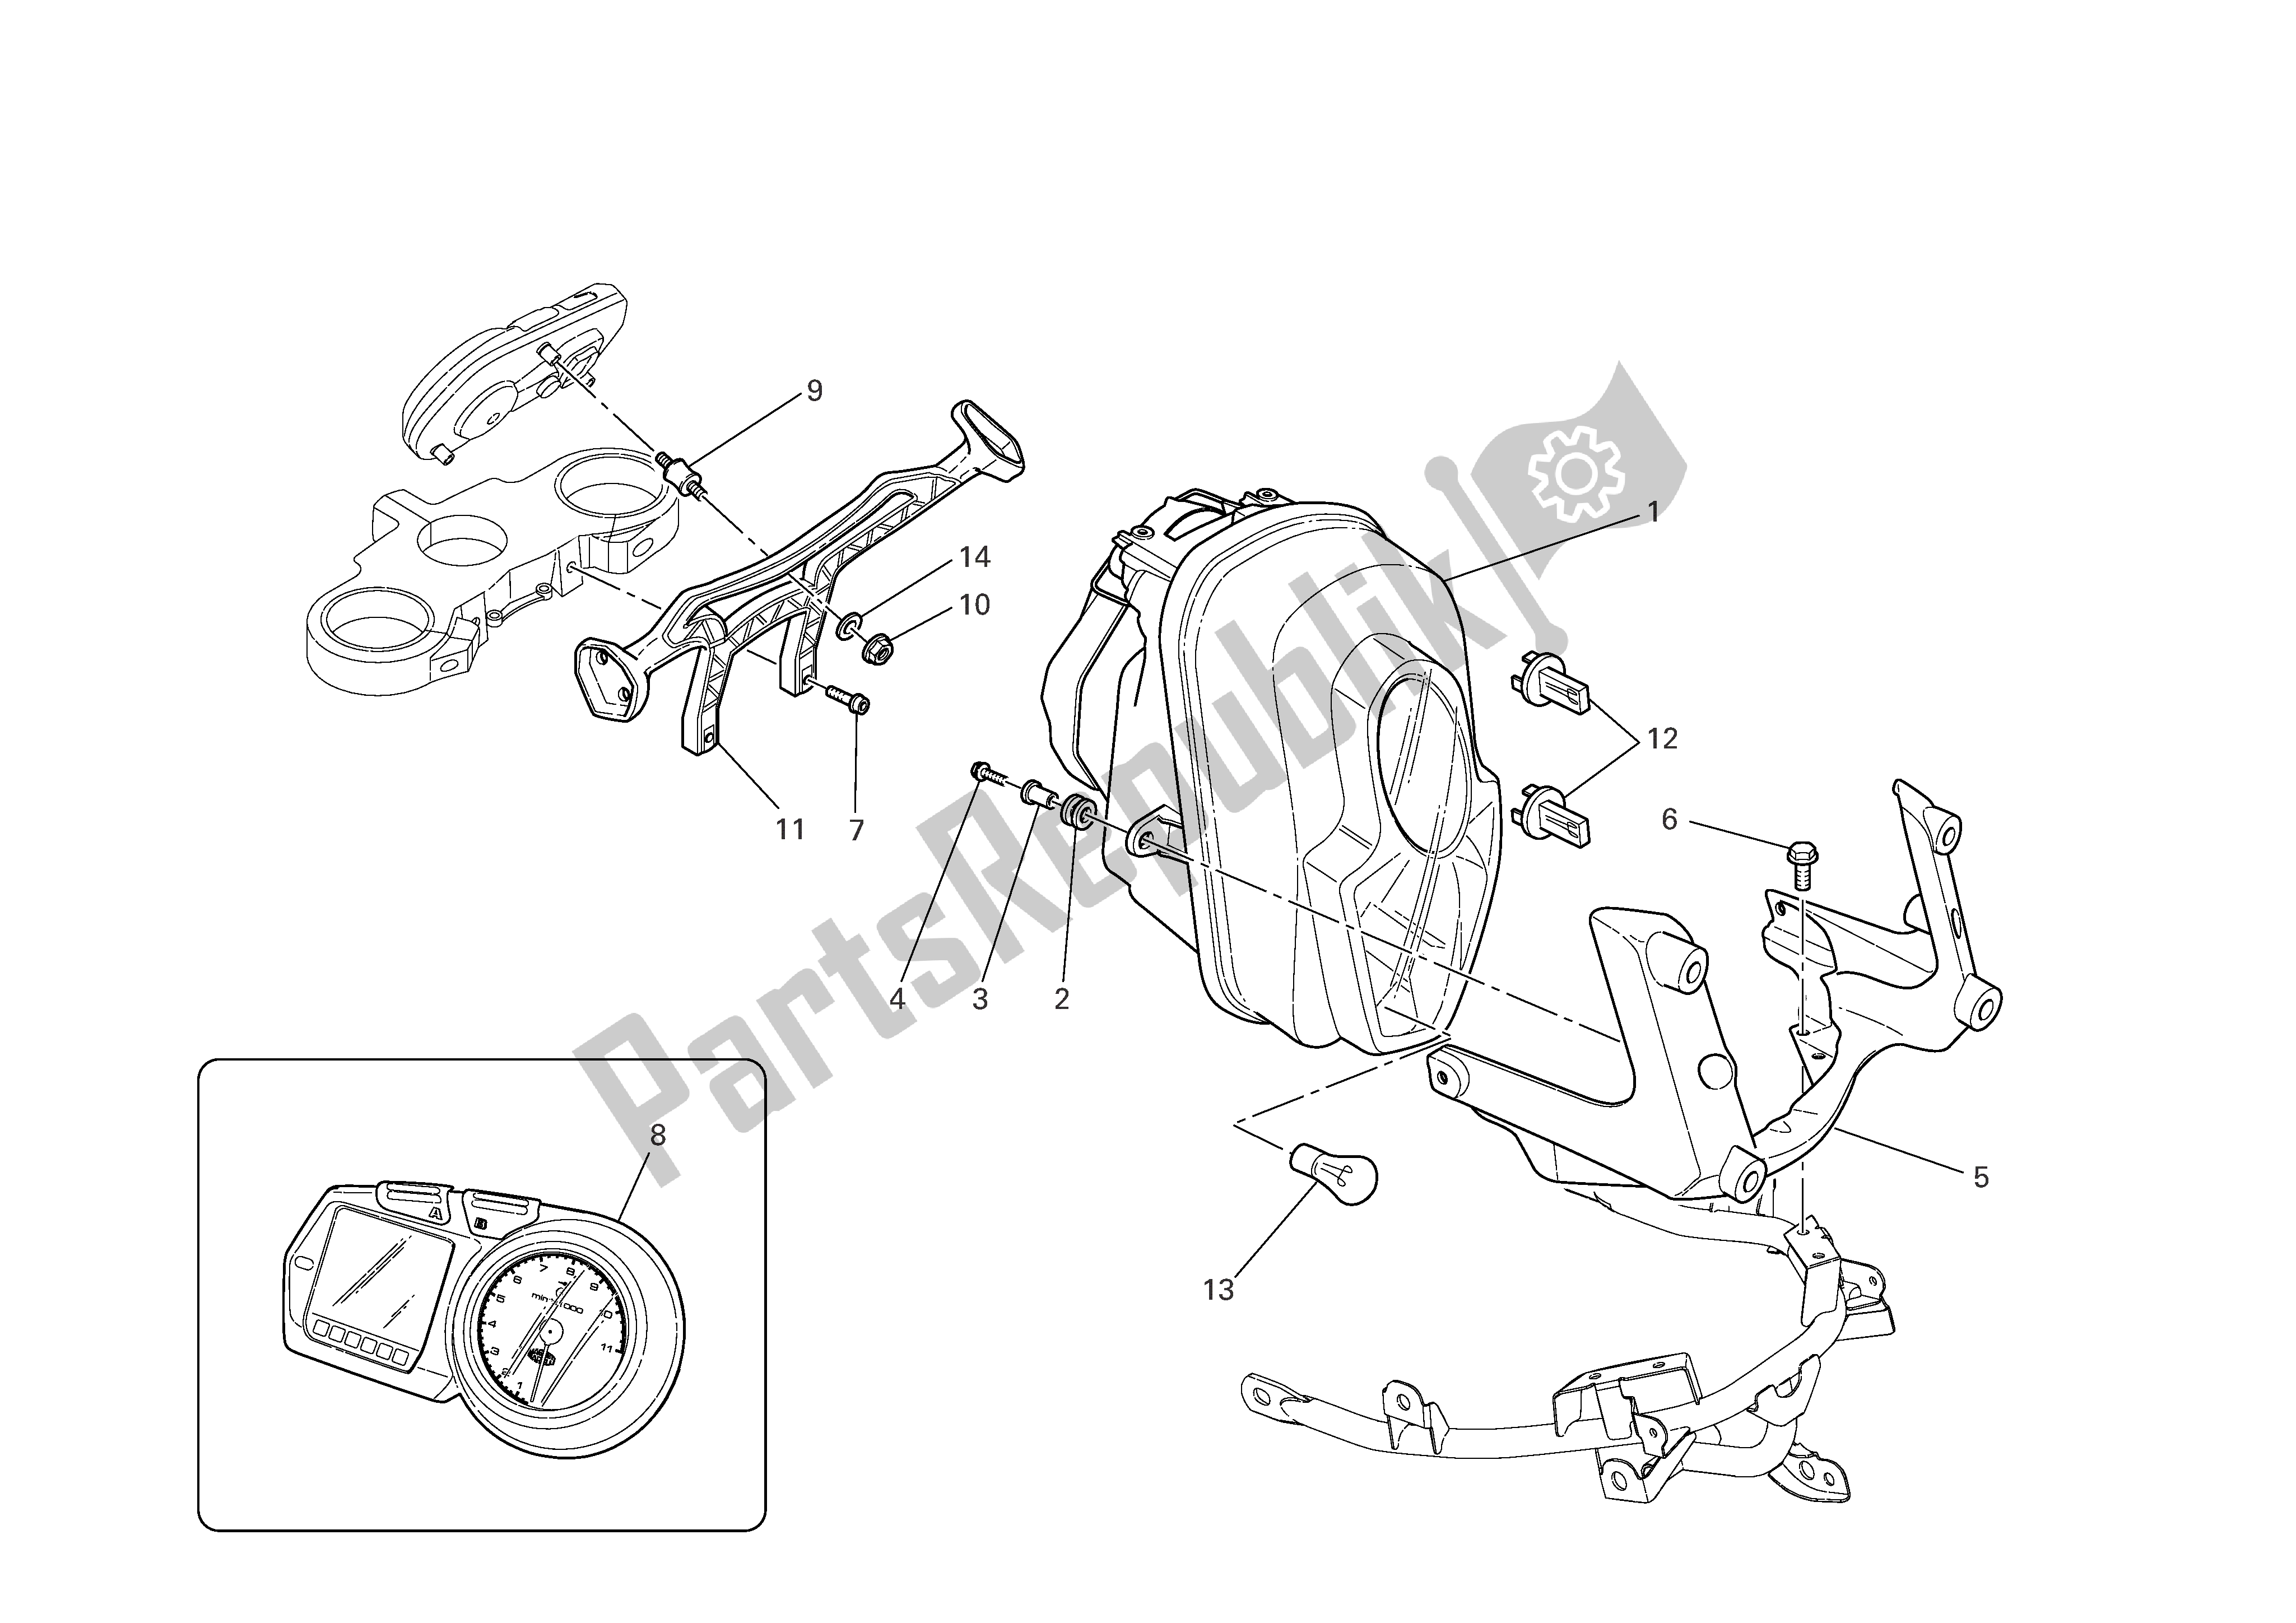 All parts for the Headlight & Instr. Panel of the Ducati Multistrada 1000 2005